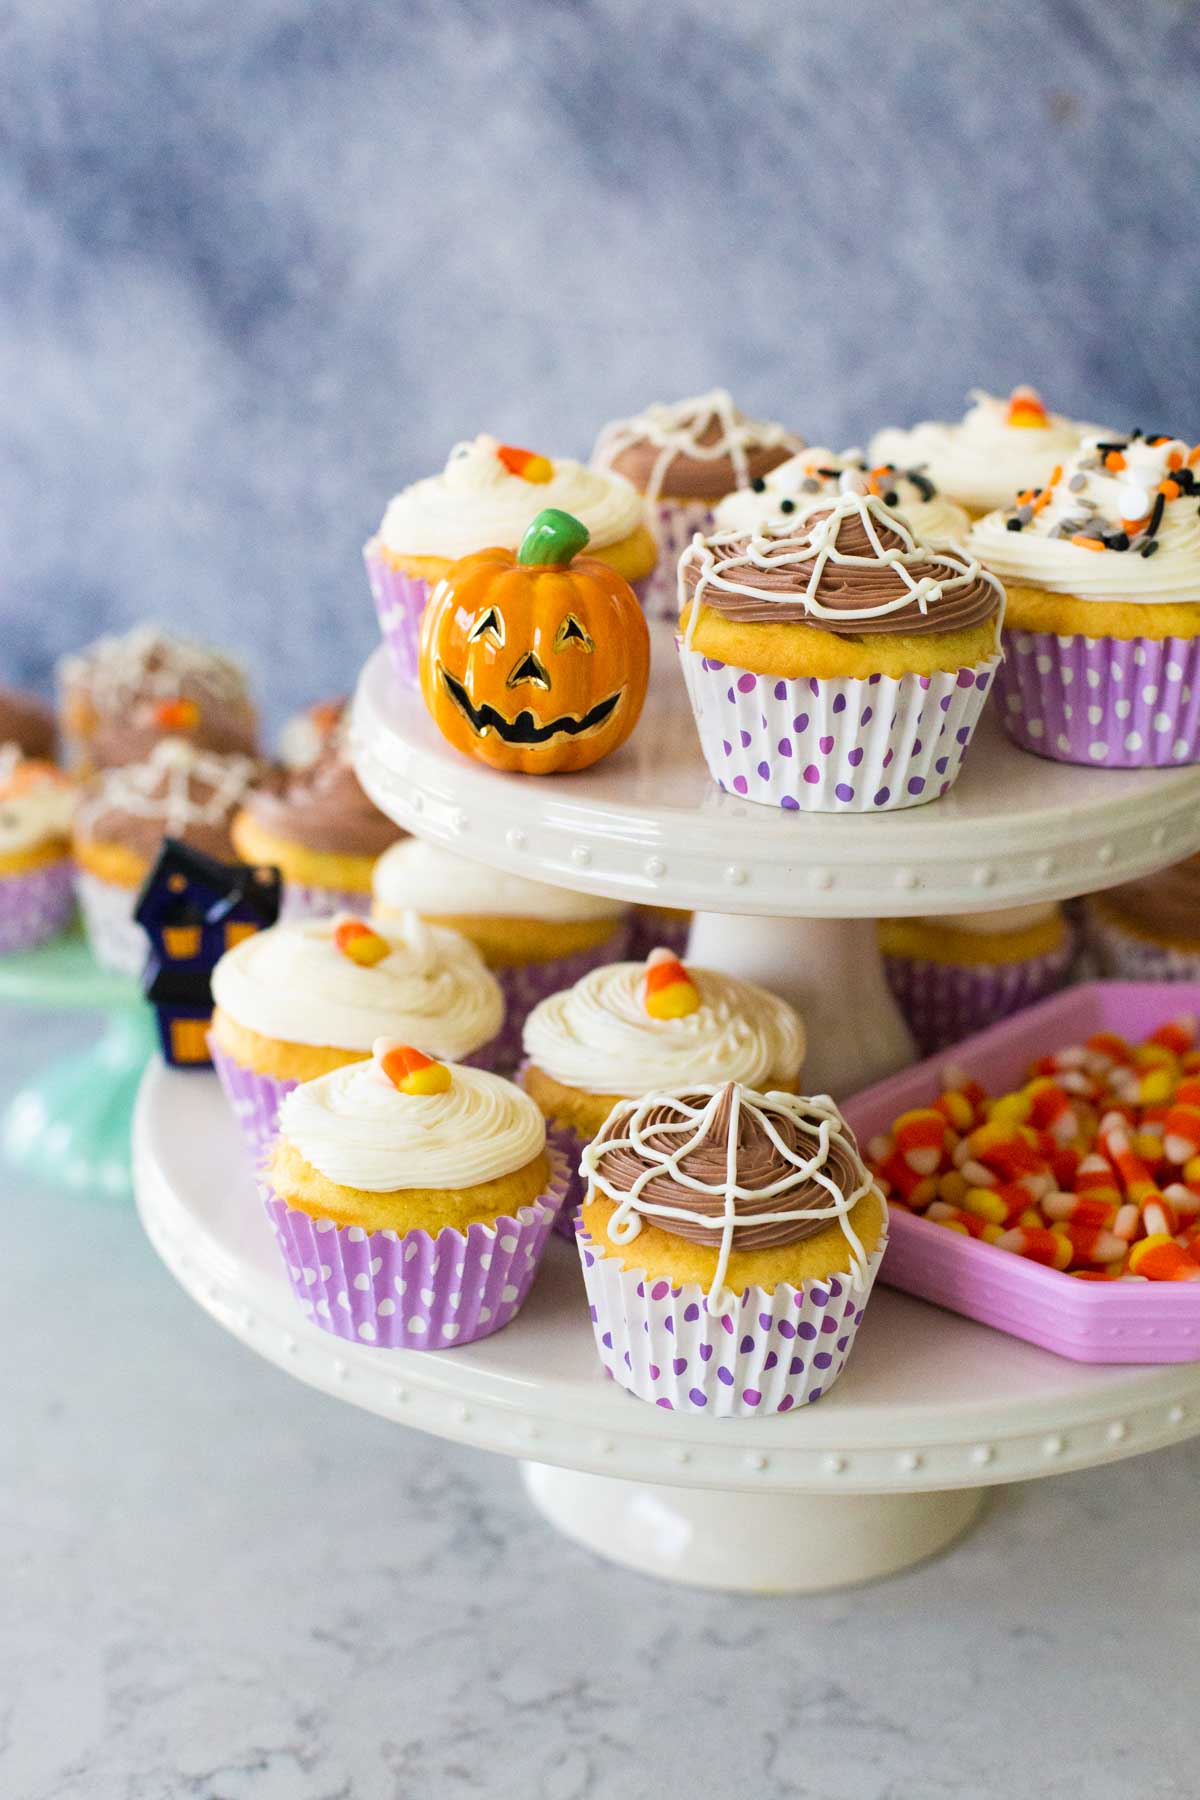 The frosted Halloween cupcakes feature chocolate spider webs, candy corn, and sprinkles.